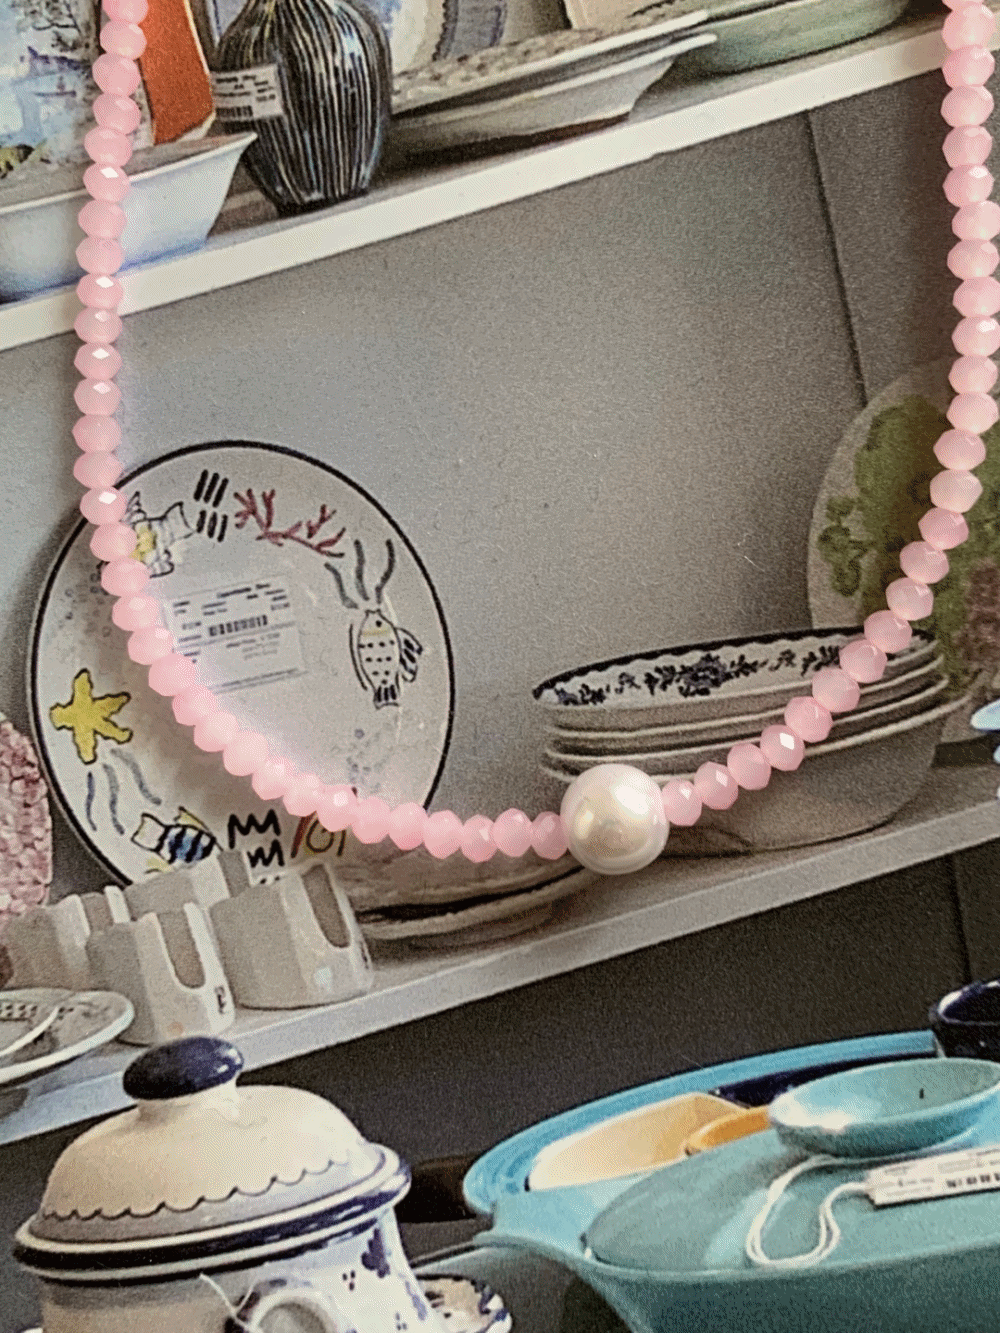 [Acc] Kyoko pink pearl necklace / one color